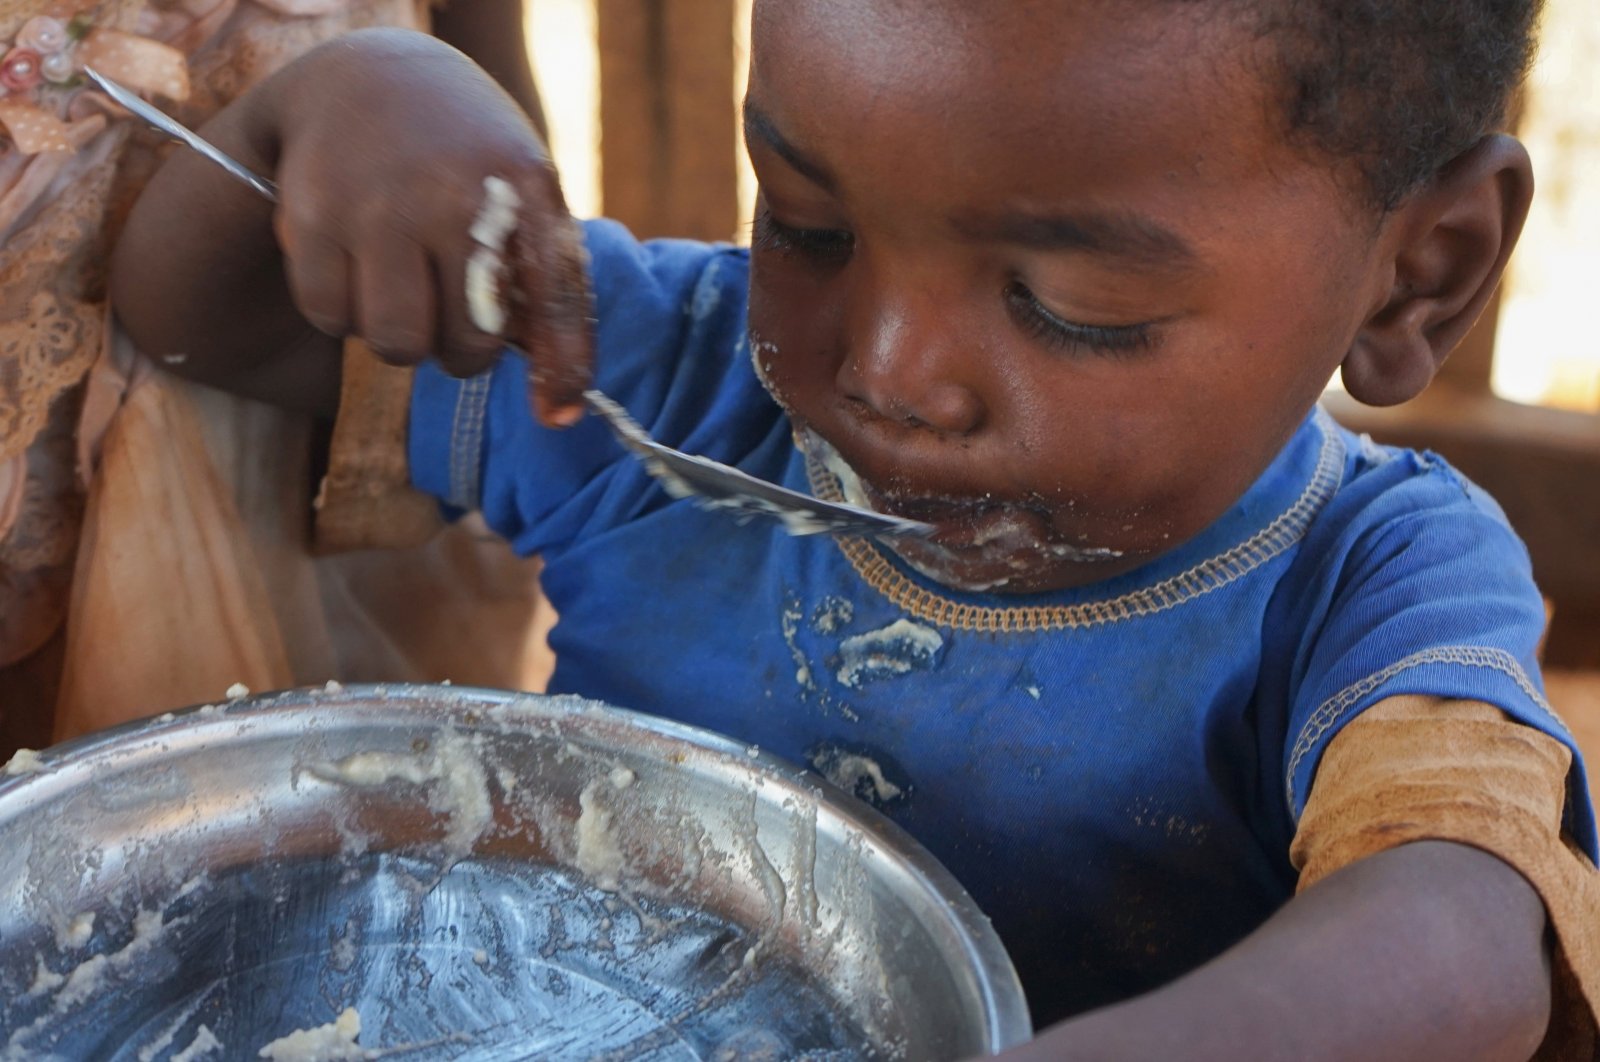 A Malagasy child eats a meal at the Avotse feeding program that benefits malnourished children with hot meals in Maropia Nord village in the region of Anosy, southern Madagascar, Sept. 30, 2021. (Reuters Photo)